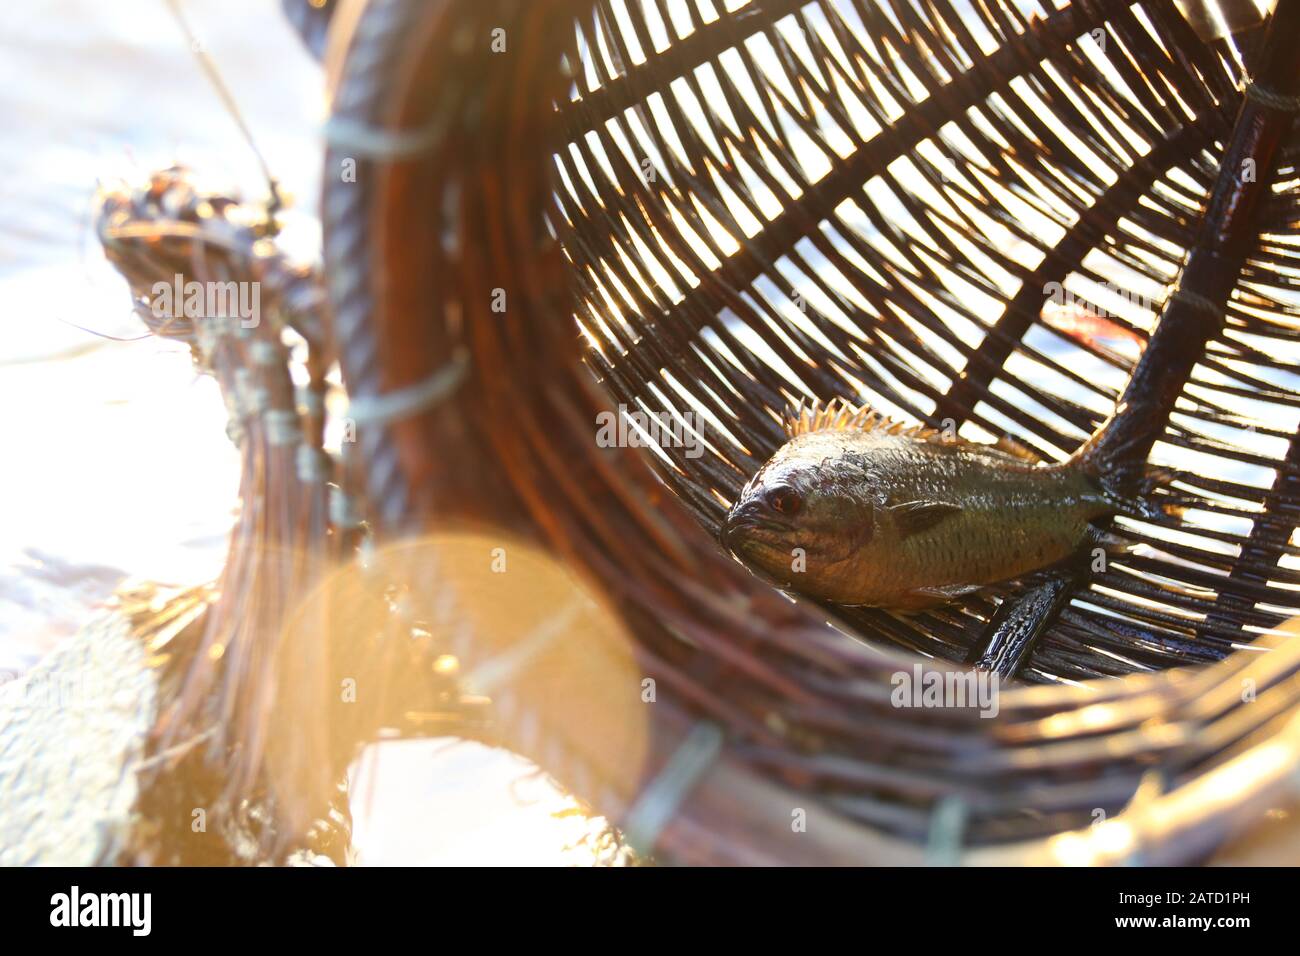 Woven rattan creel or fishing basket that is a traditional fish container  in rural fishing village in Cambodia that shows authentic life and culture  Stock Photo - Alamy